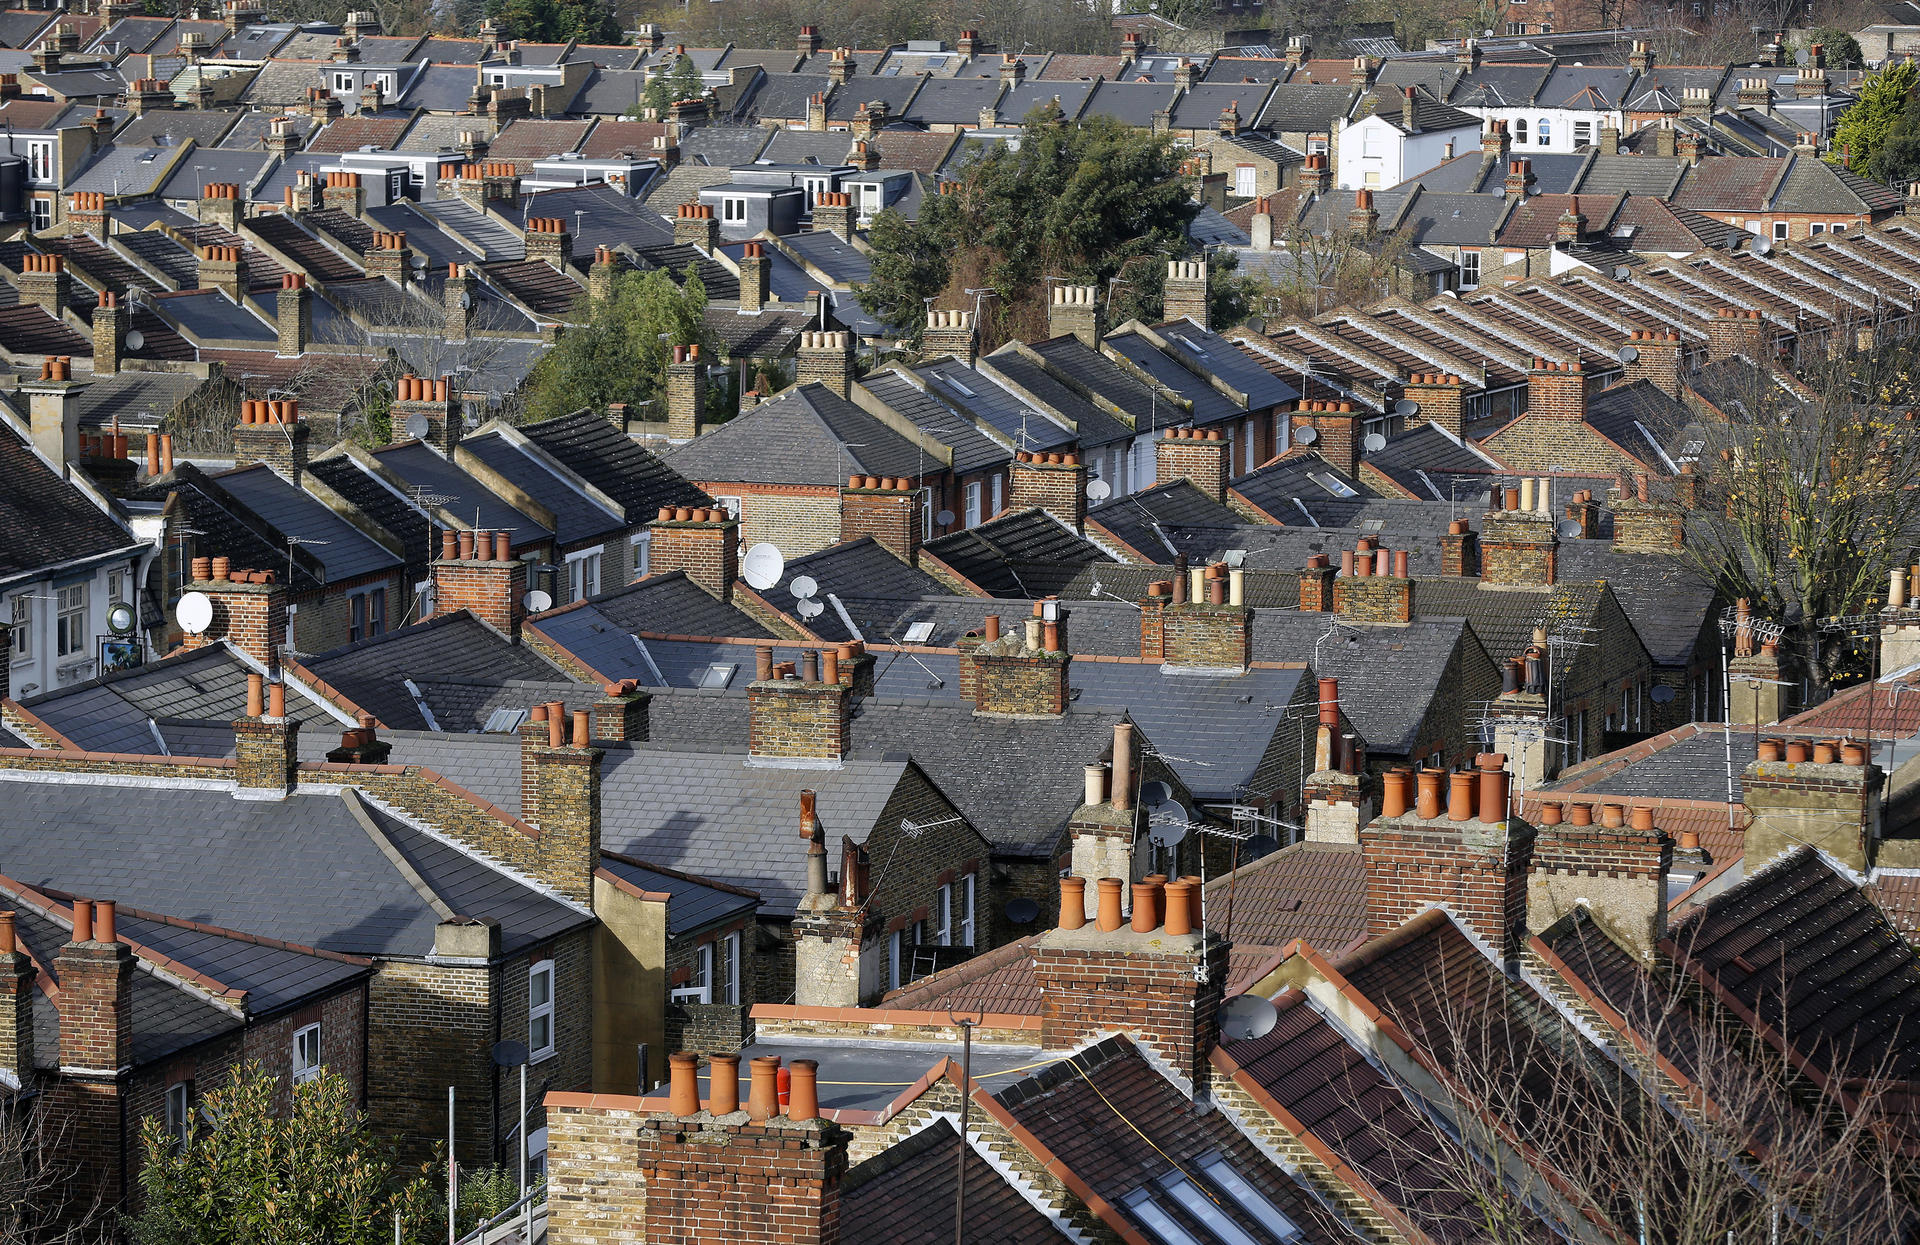 Mortgage approvals in Britain leapt from 58,238 in June to 60,624 in July, the highest level seen since March 2008. Photo: Bloomberg